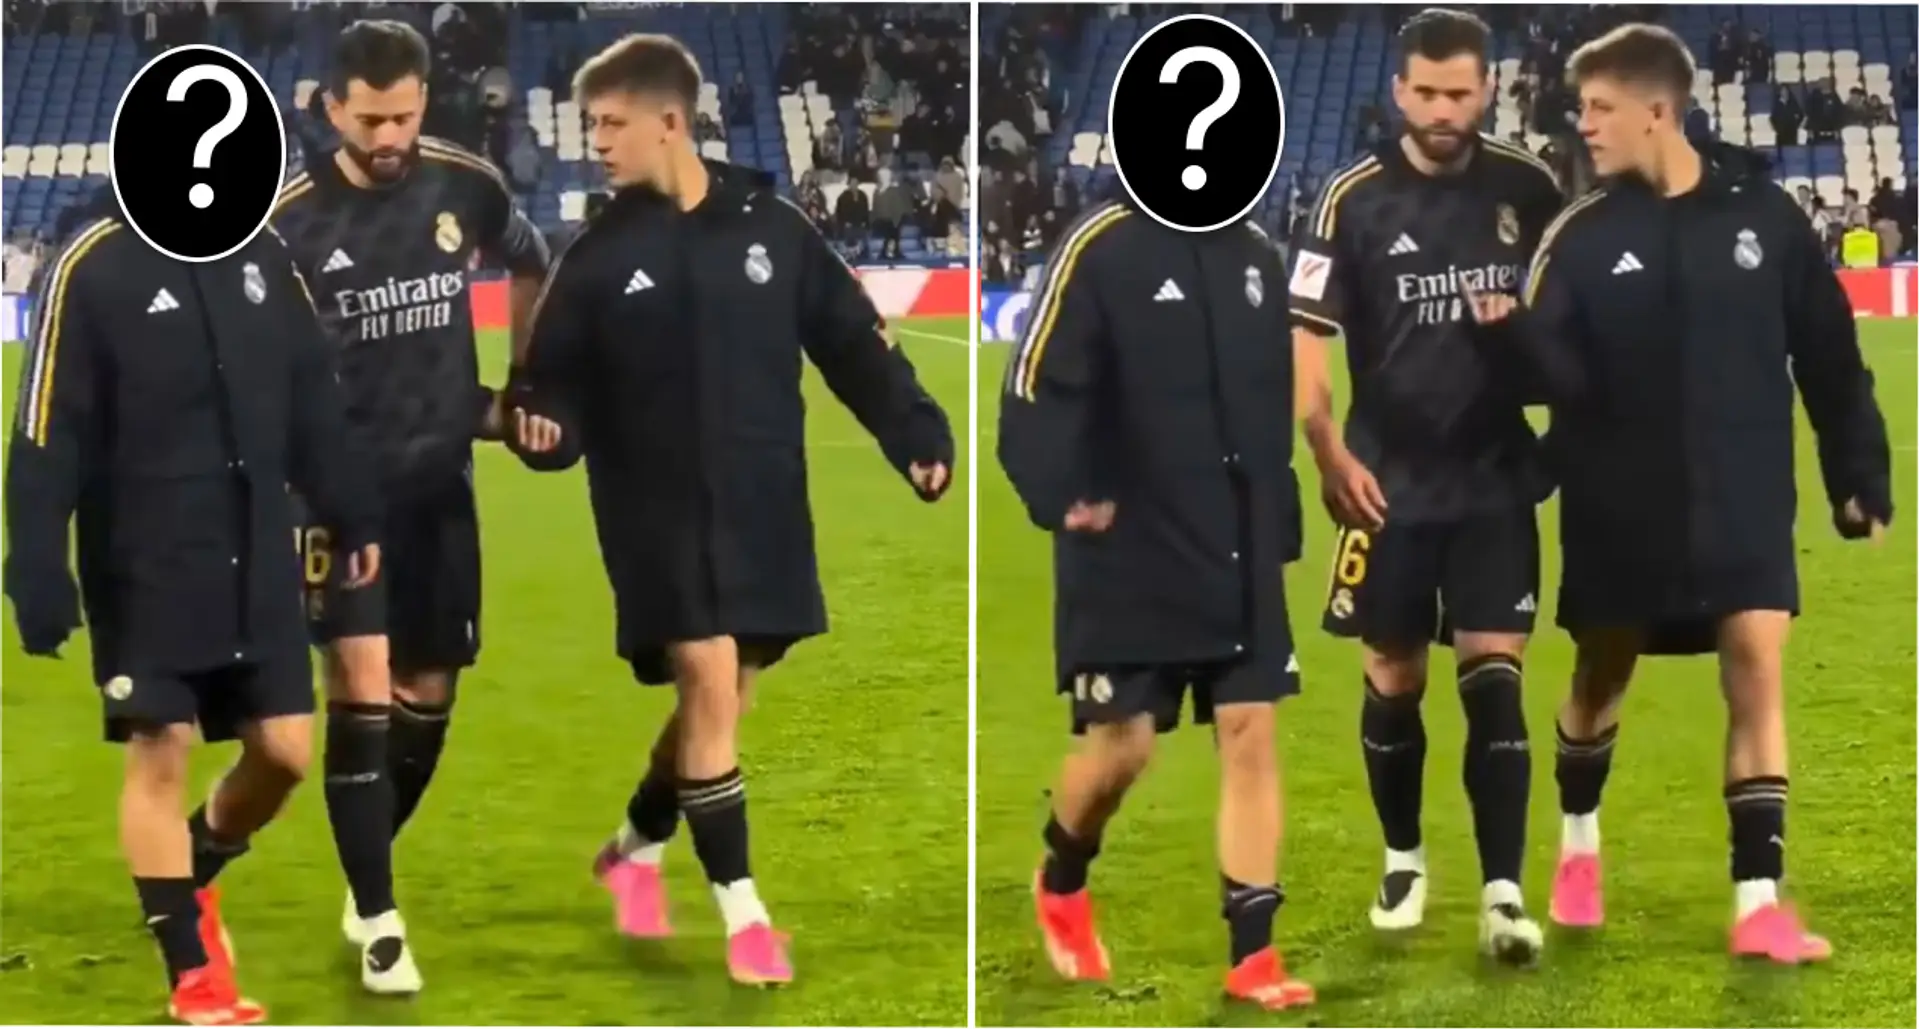 Real Madrid player moonlights as interpreter after Sociedad game – spotted